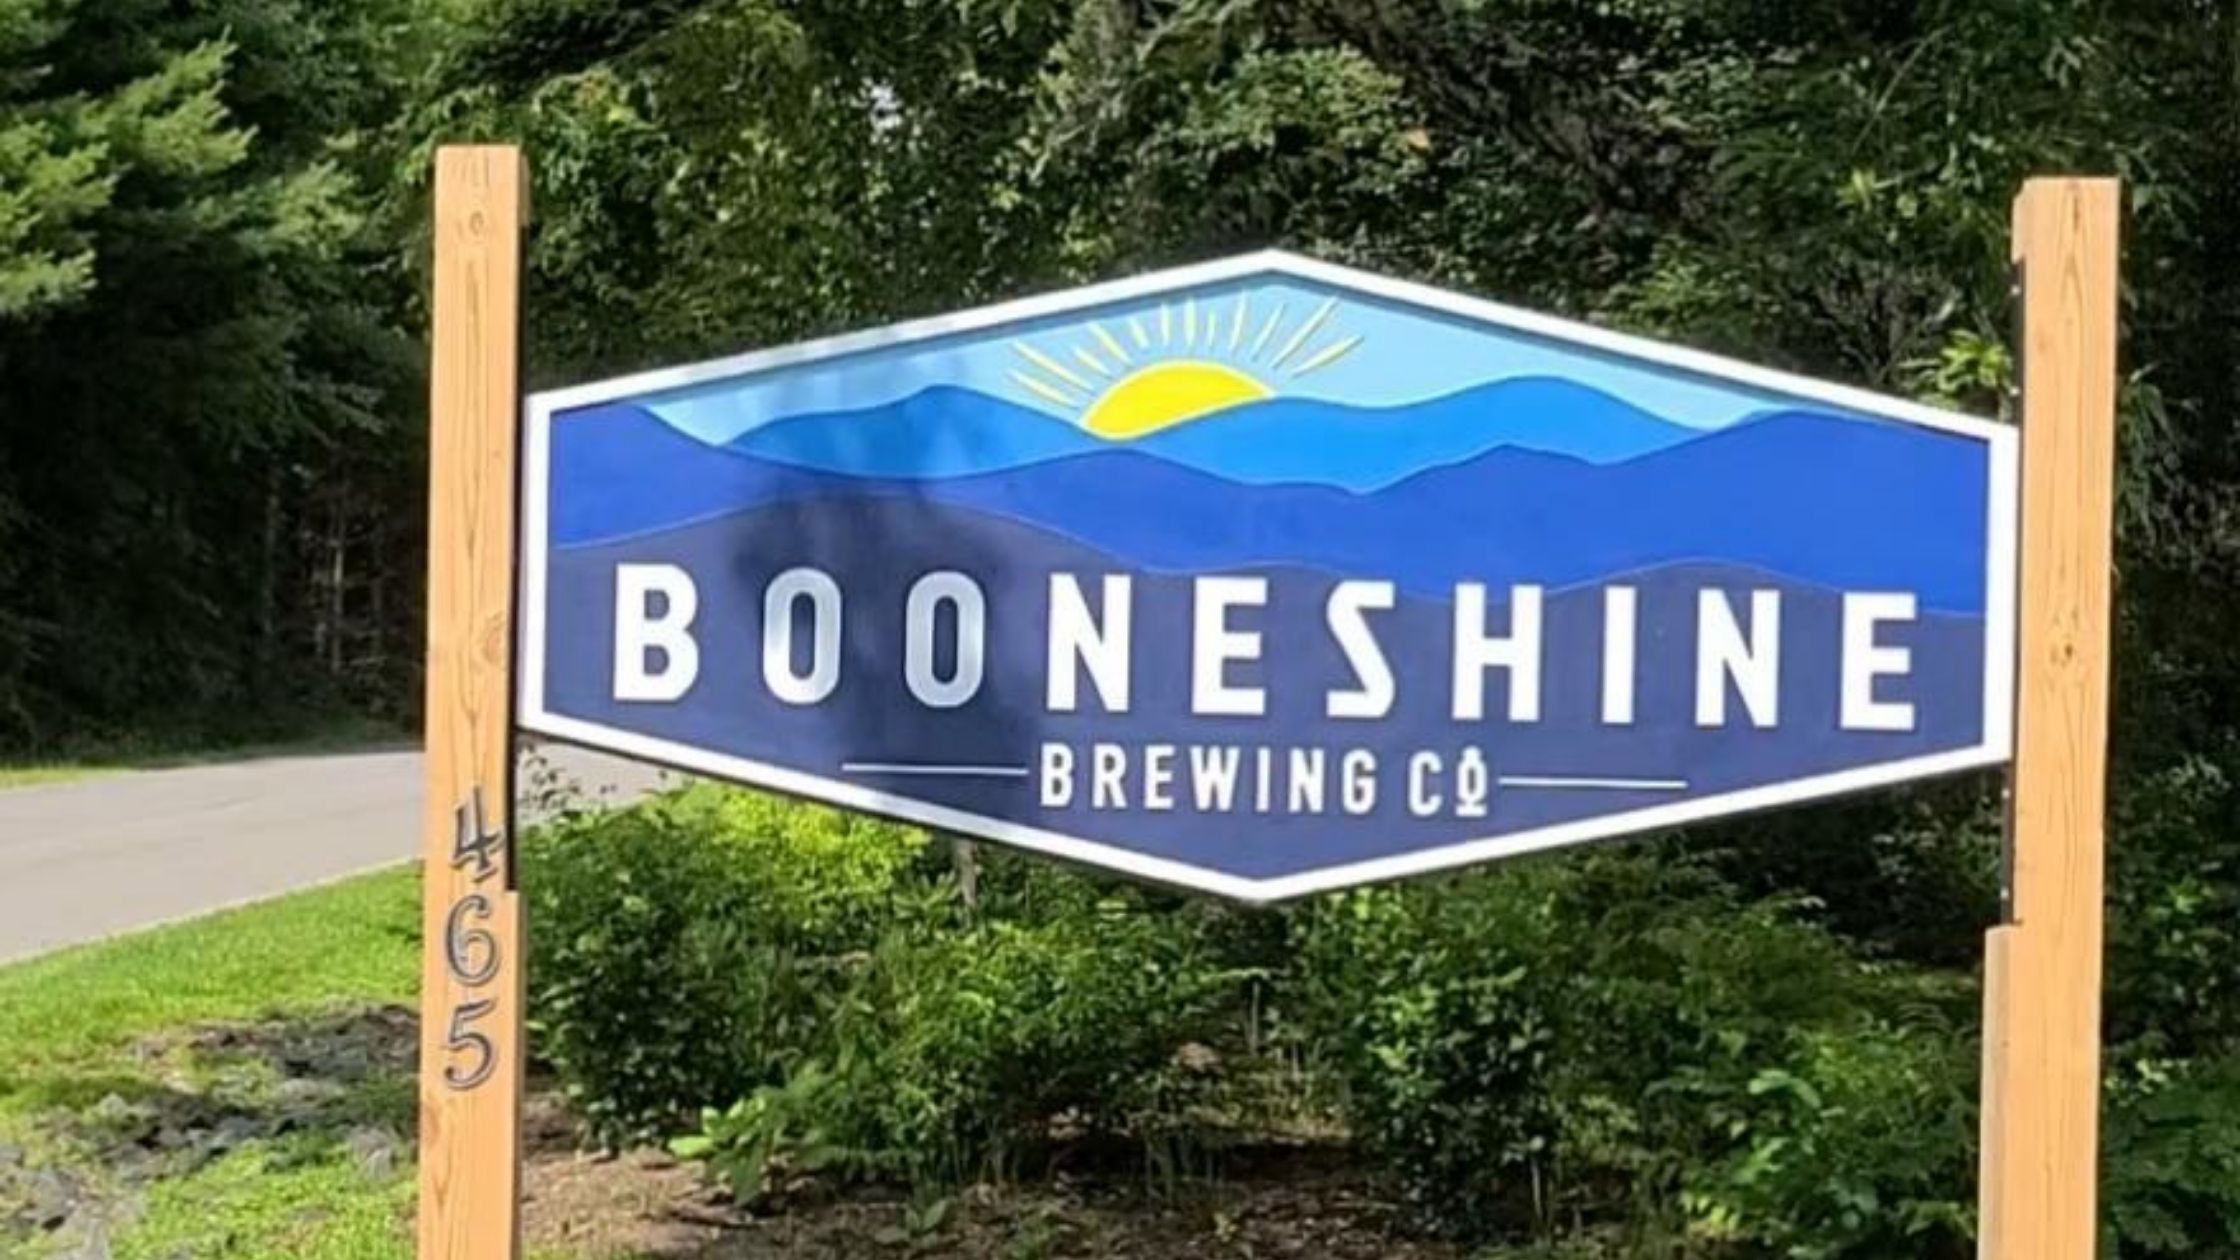 Signage outside of Booneshine Brewing Company in Boone, NC.